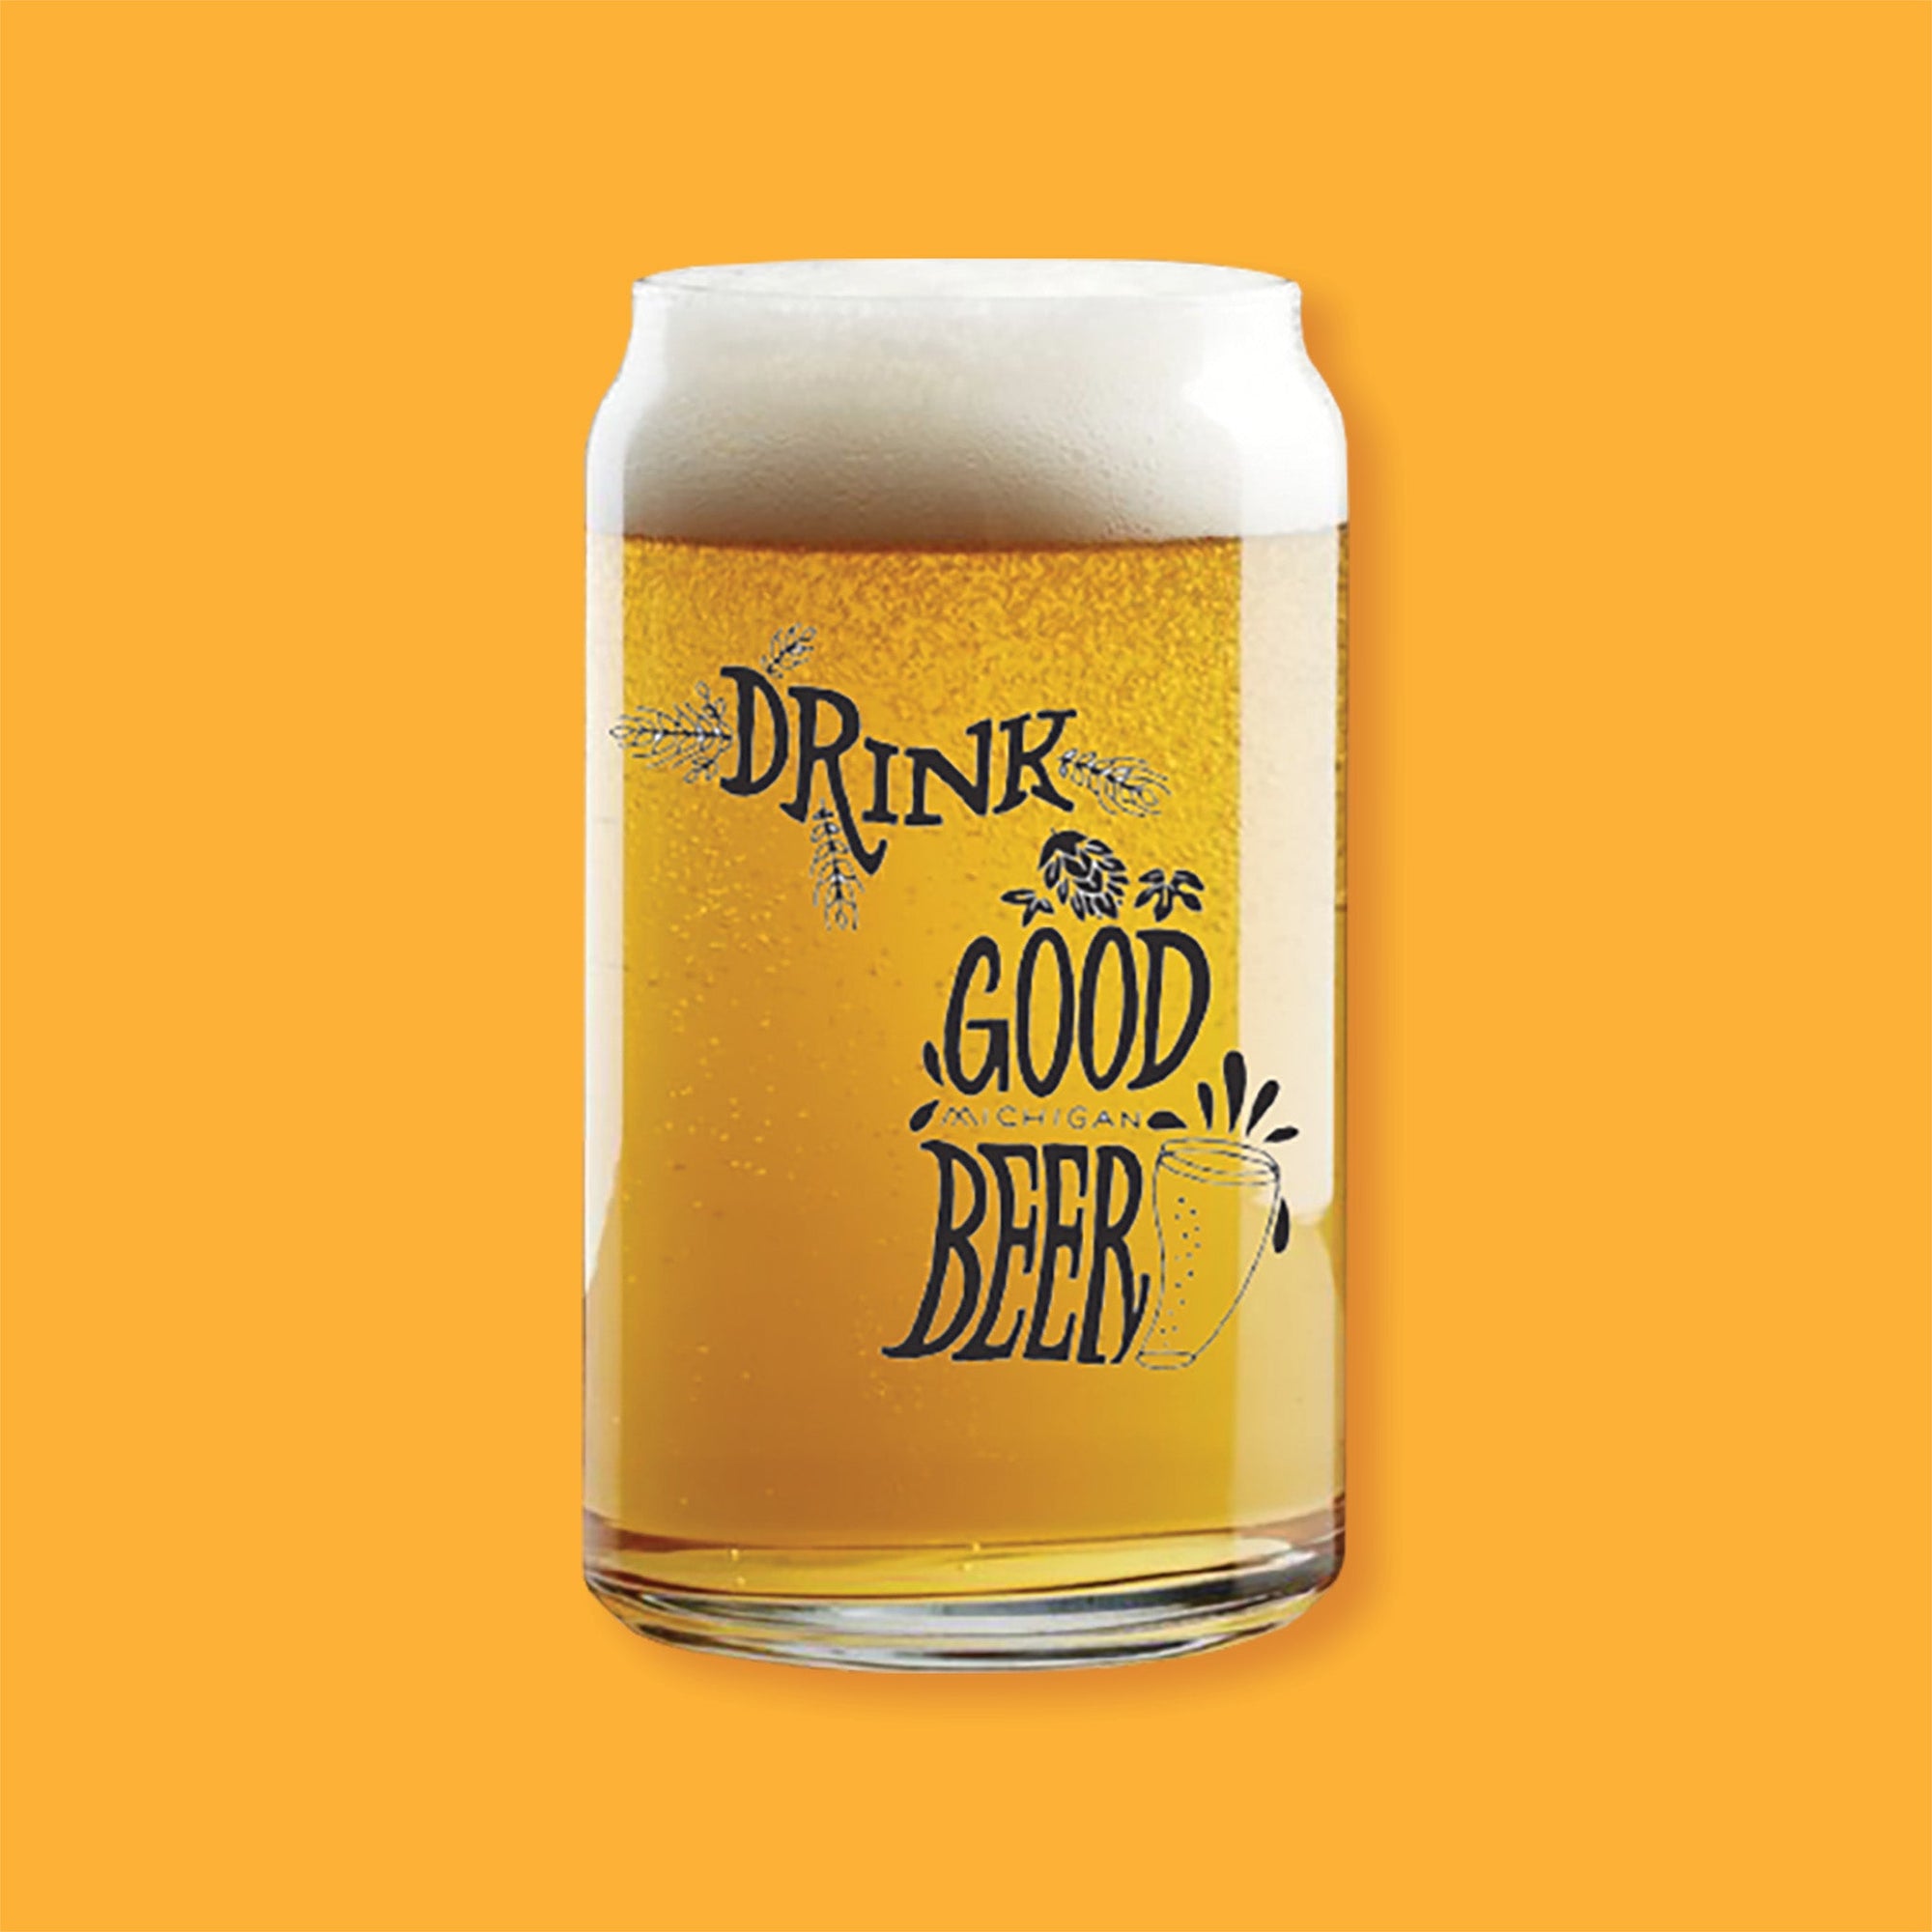 On a sunny mustard background is a glass. This beer can-style glass says "DRINK GOOD MICHIGAN BEER" in a black, handwritten lettering font, with illustrations of hops and a beer blass. It is filled with beer and has white foam at the top.